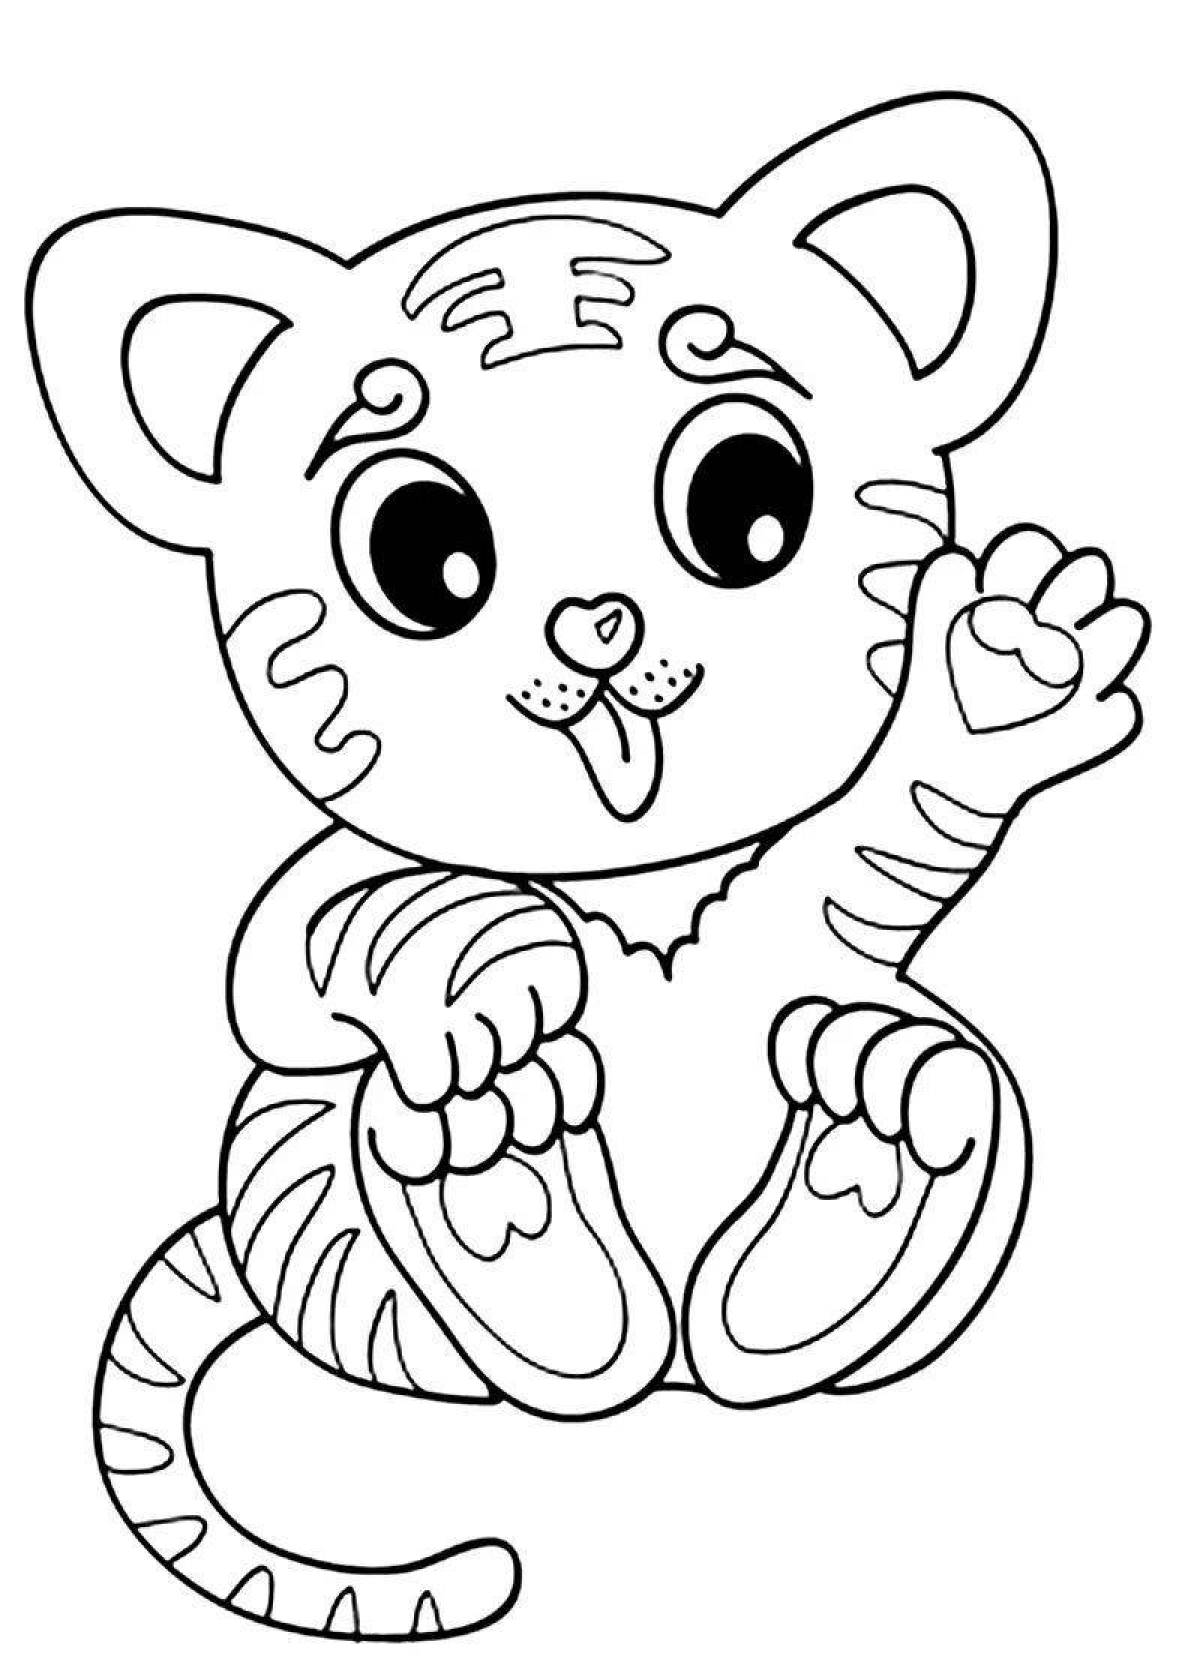 Cute little animal coloring pages